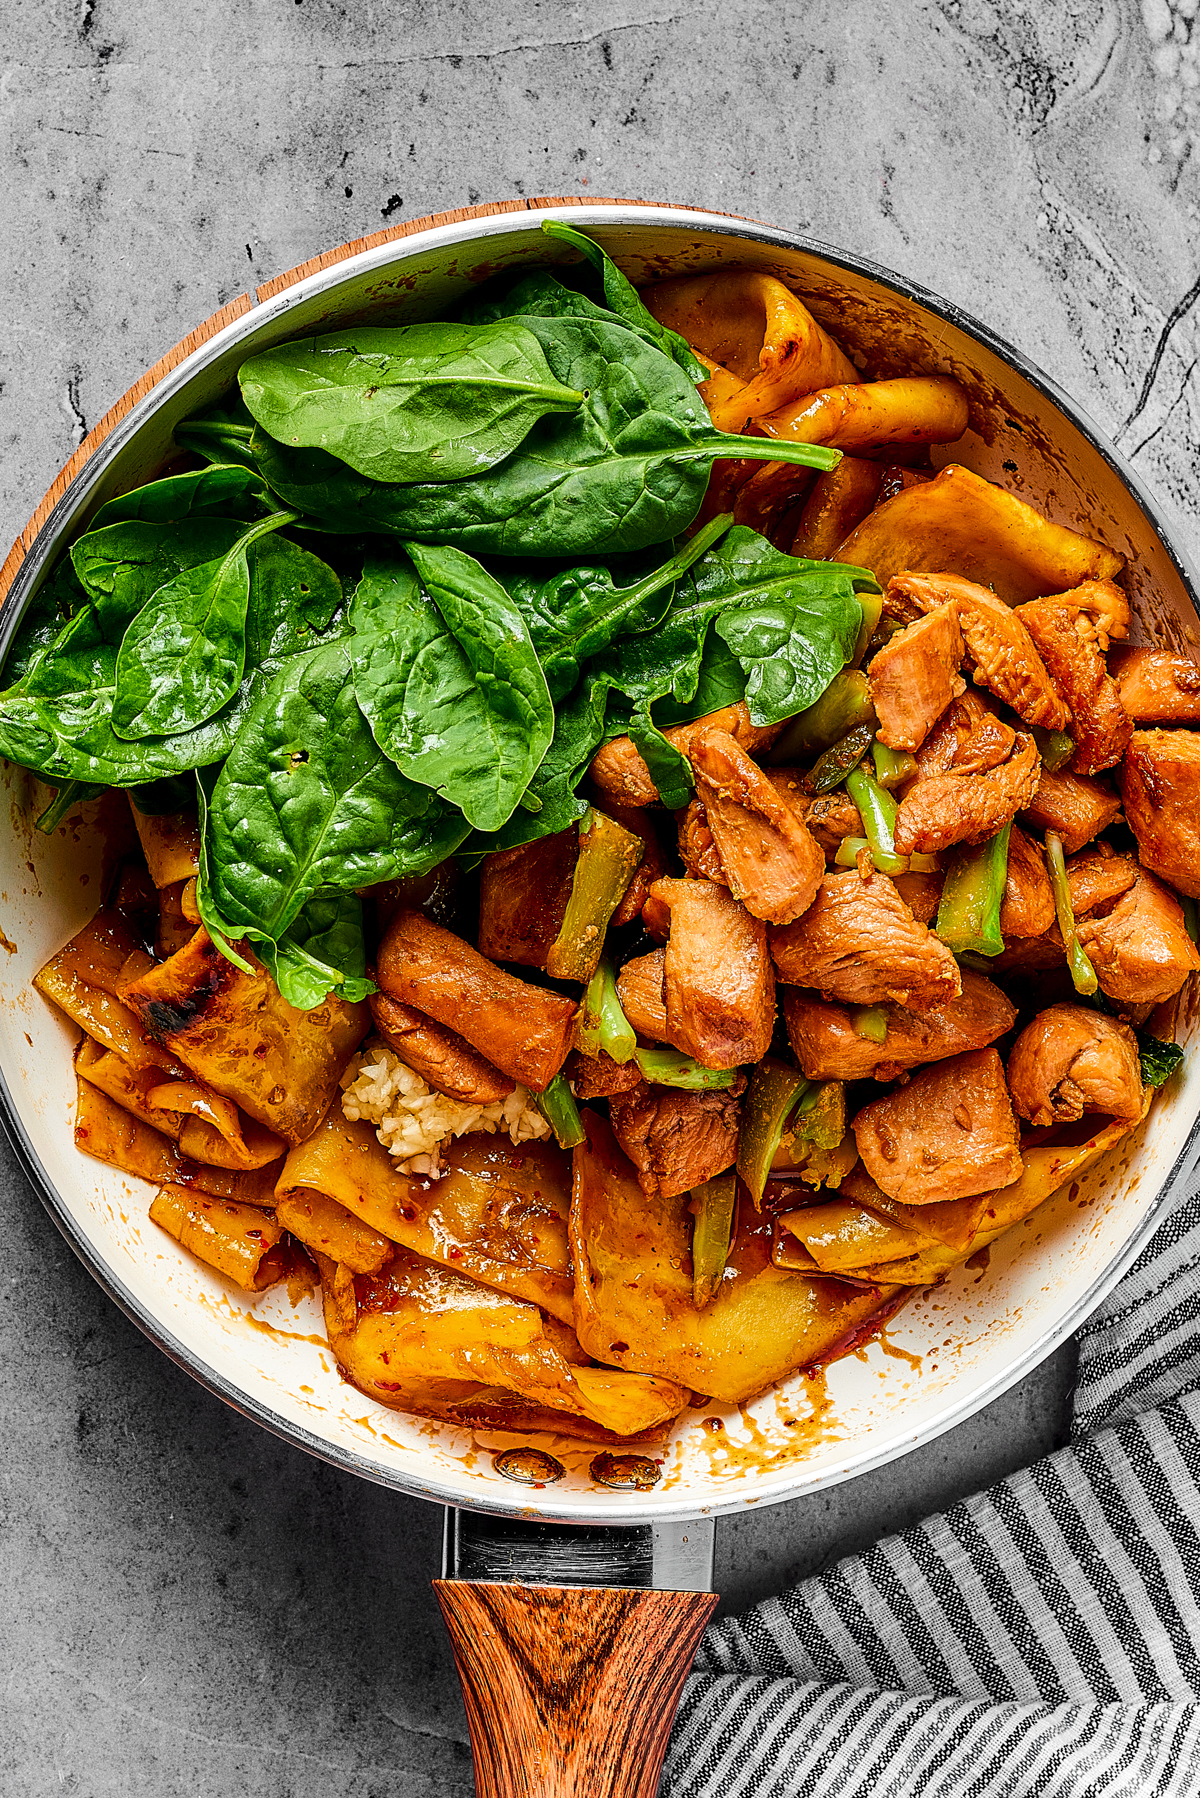 A skillet of noodles and chicken with fresh spinach added.